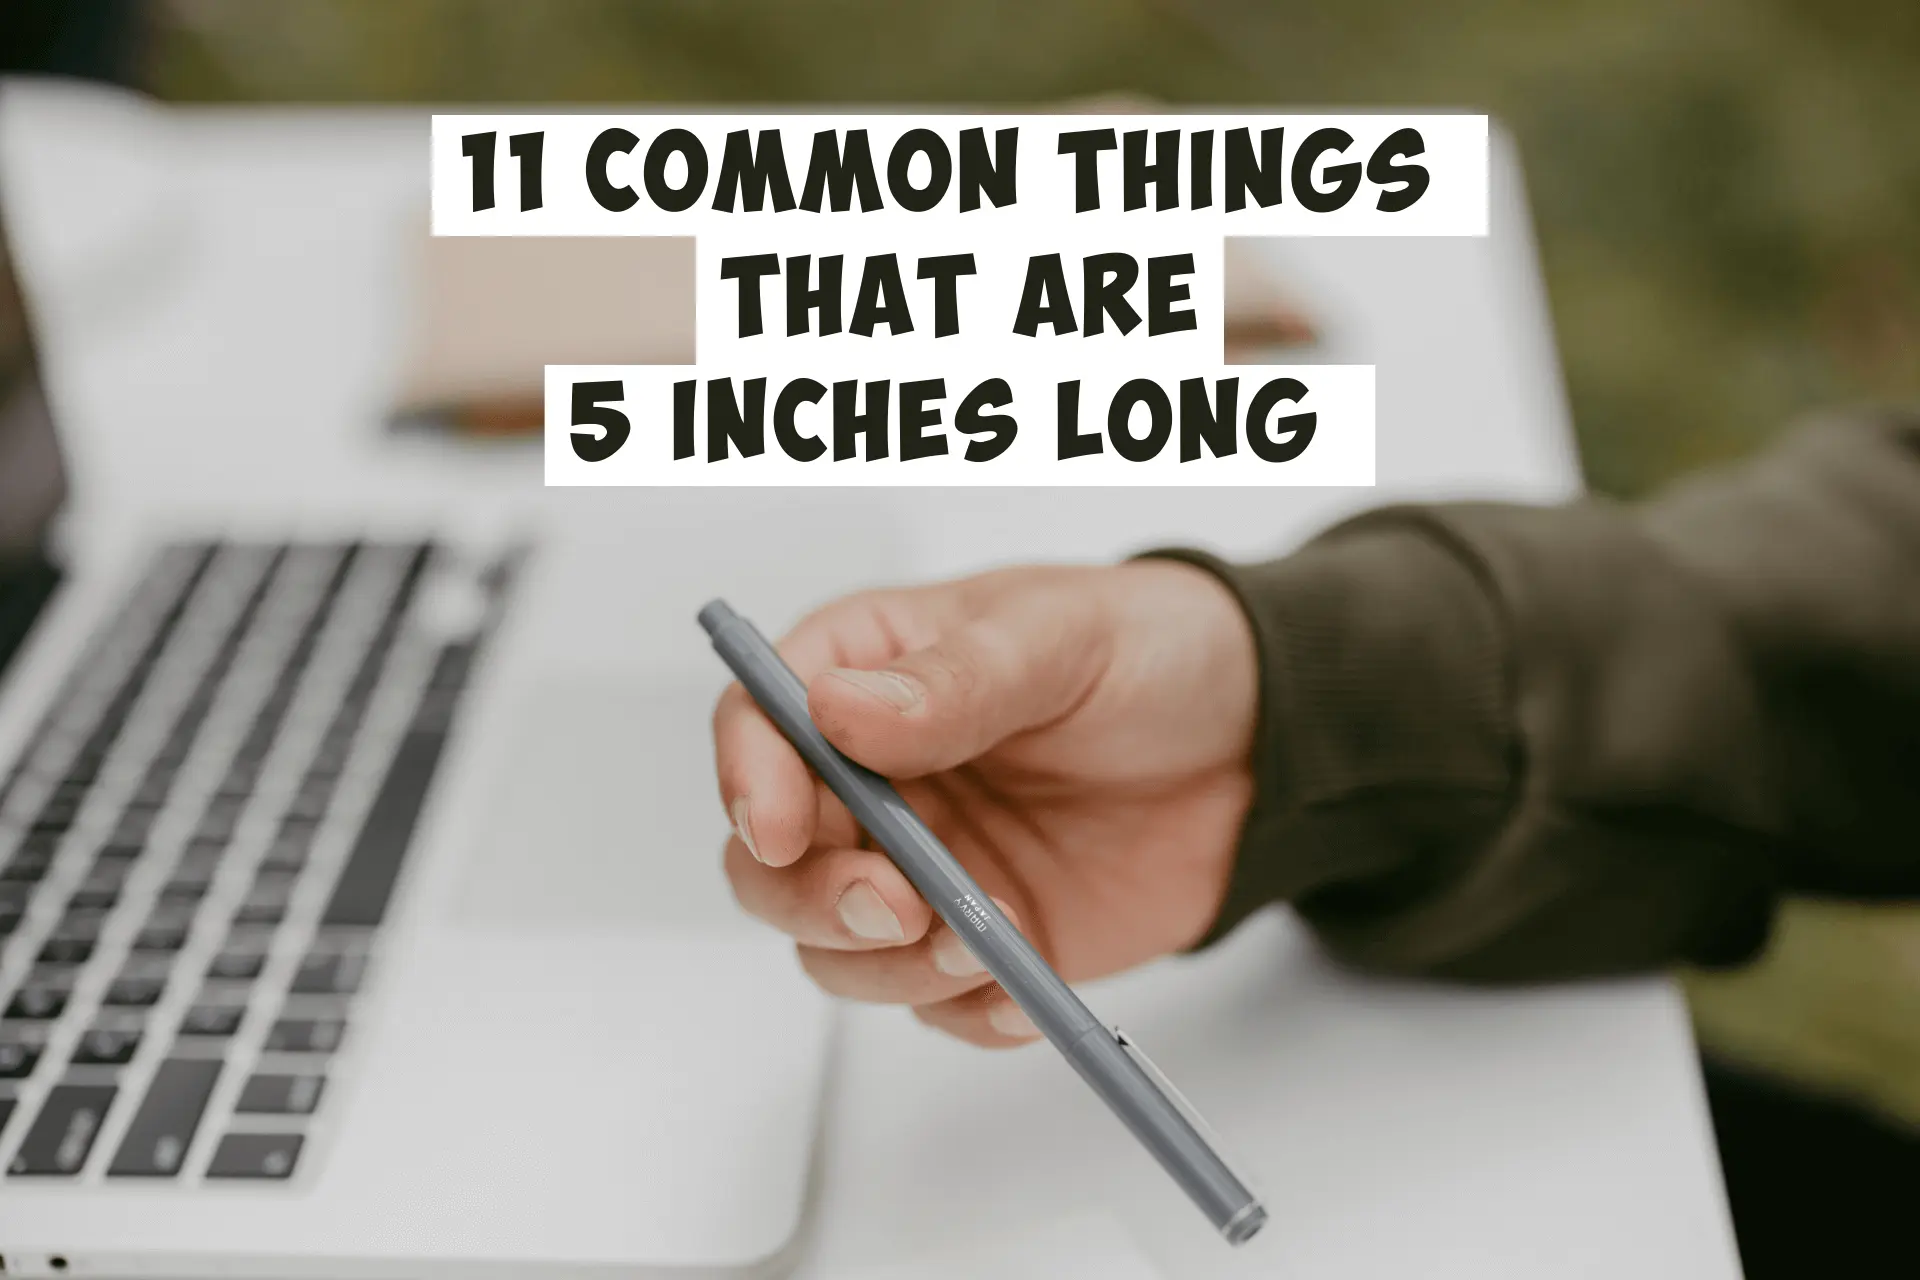 11 Common things that are 5 inches long. How long is 5 inches?